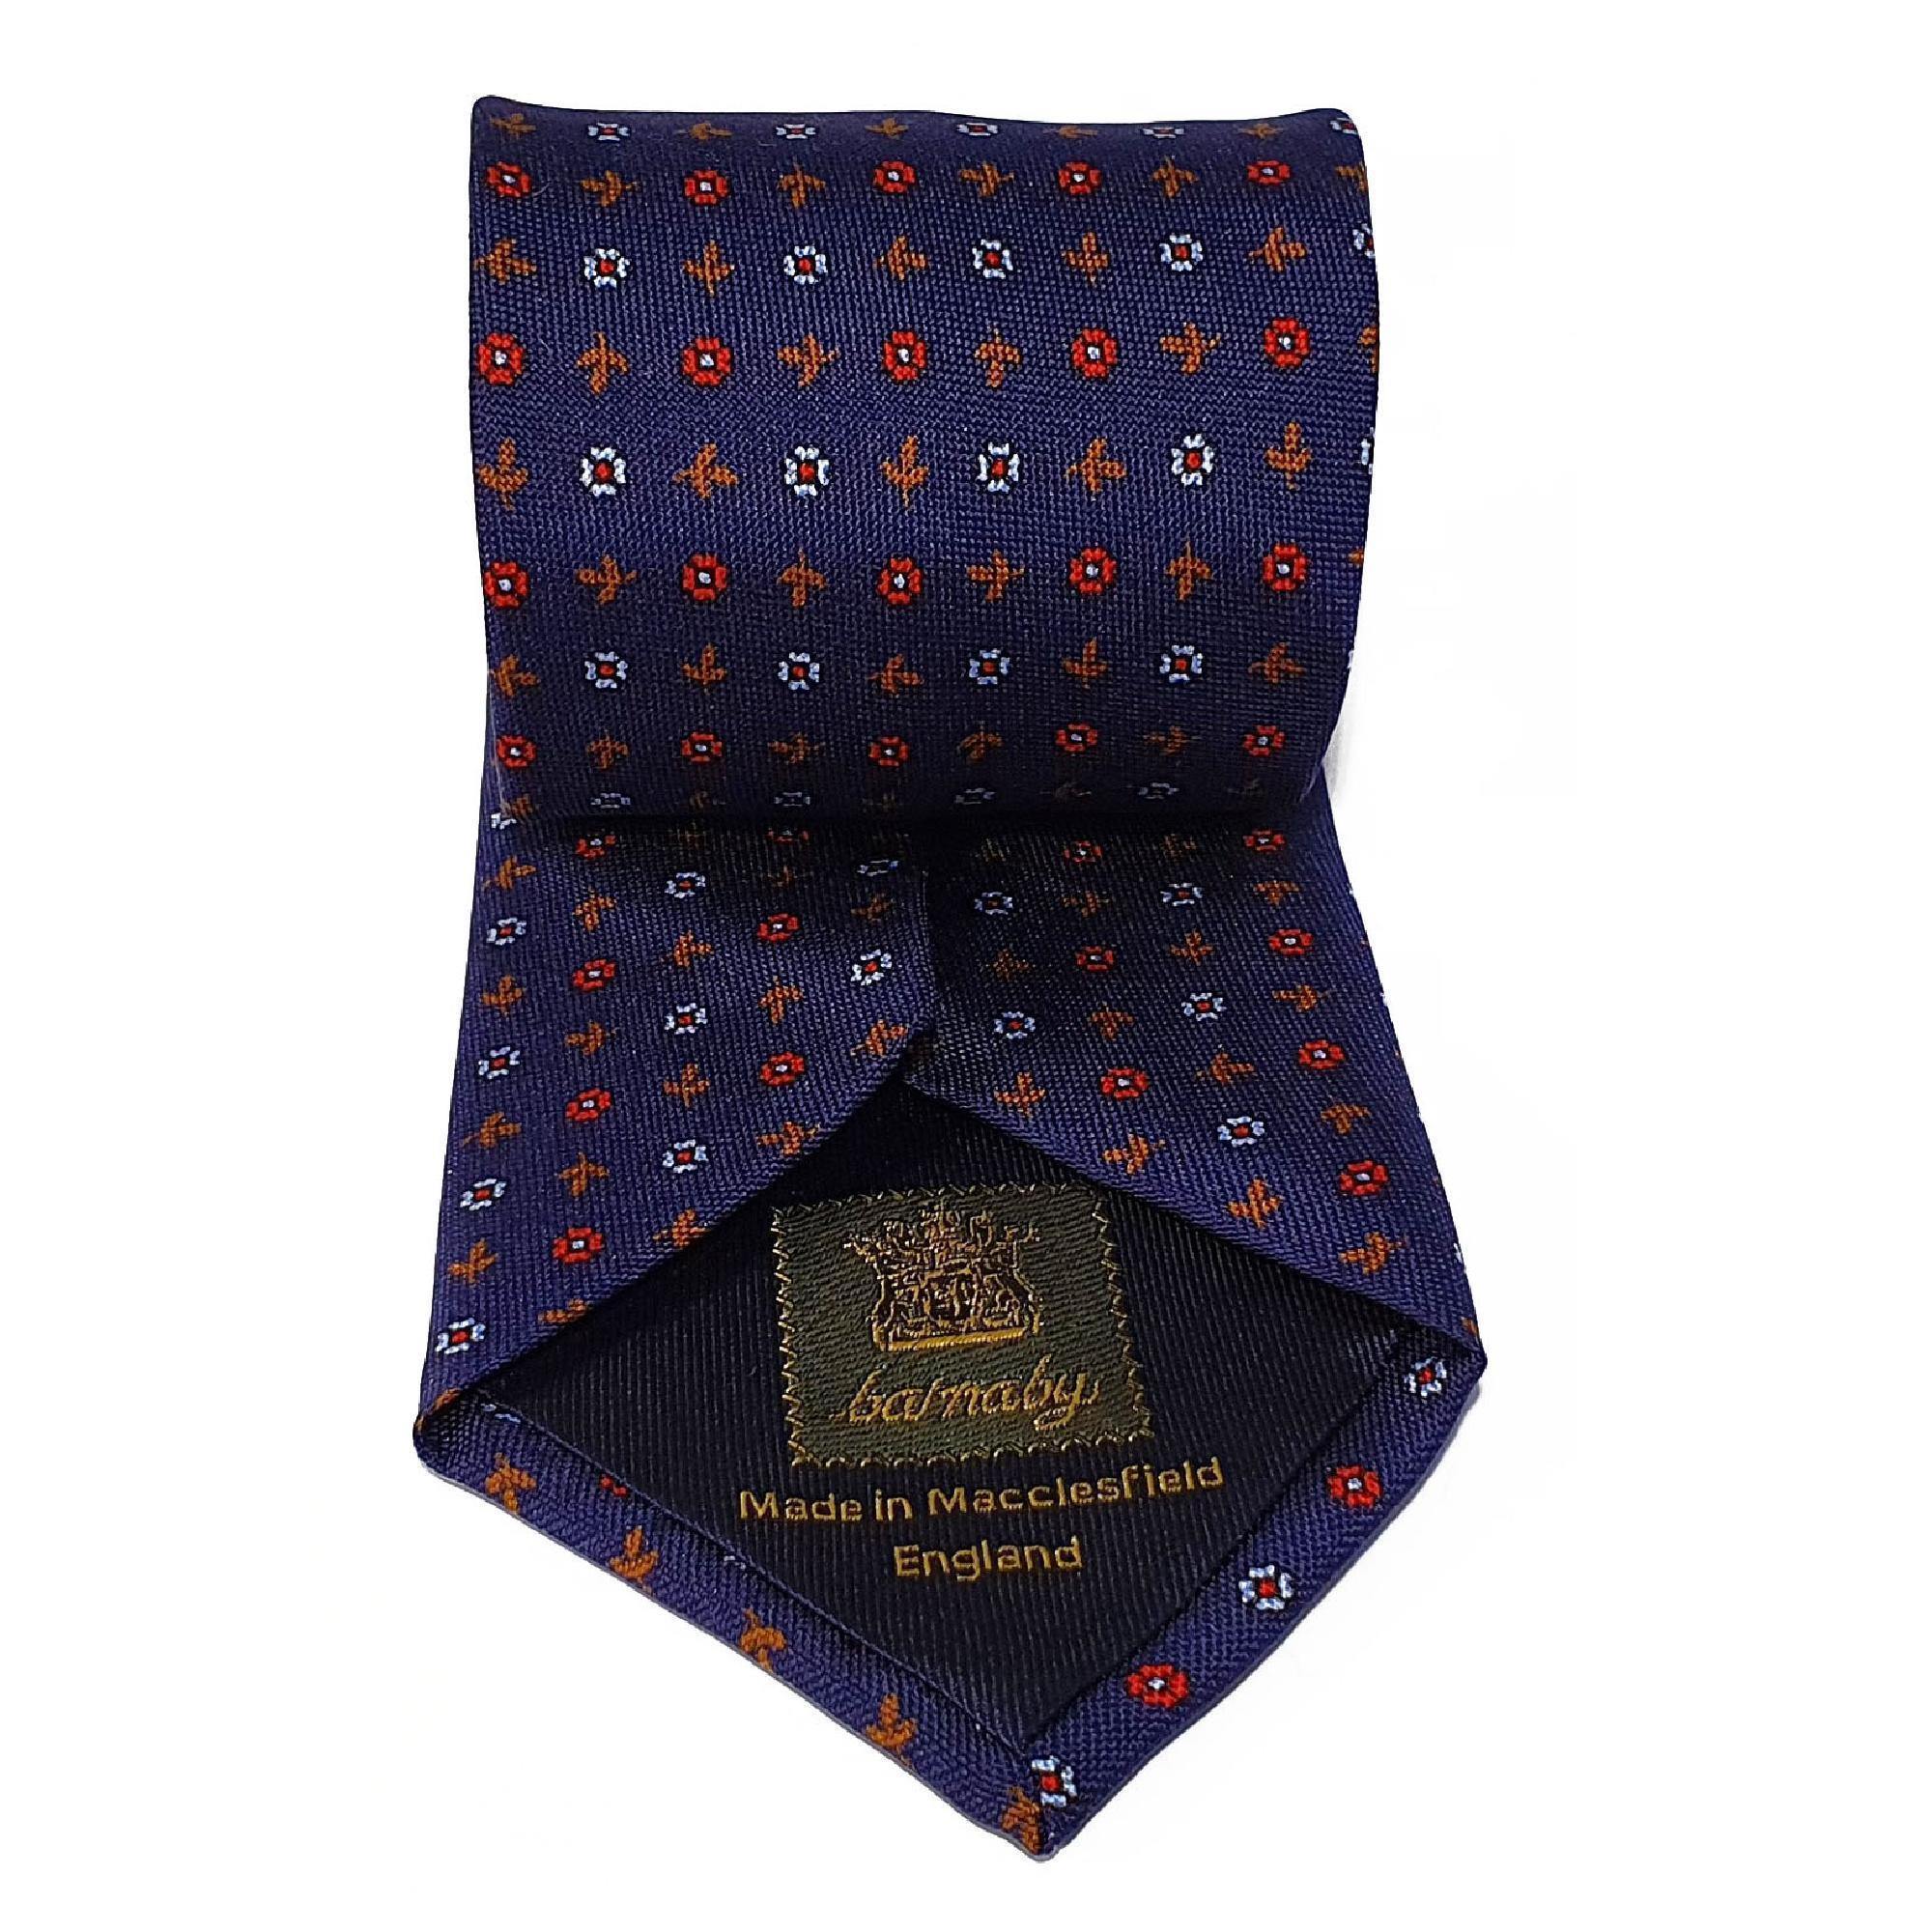 Blue Leaves Printed Silk Tie Hand Finished - British Made